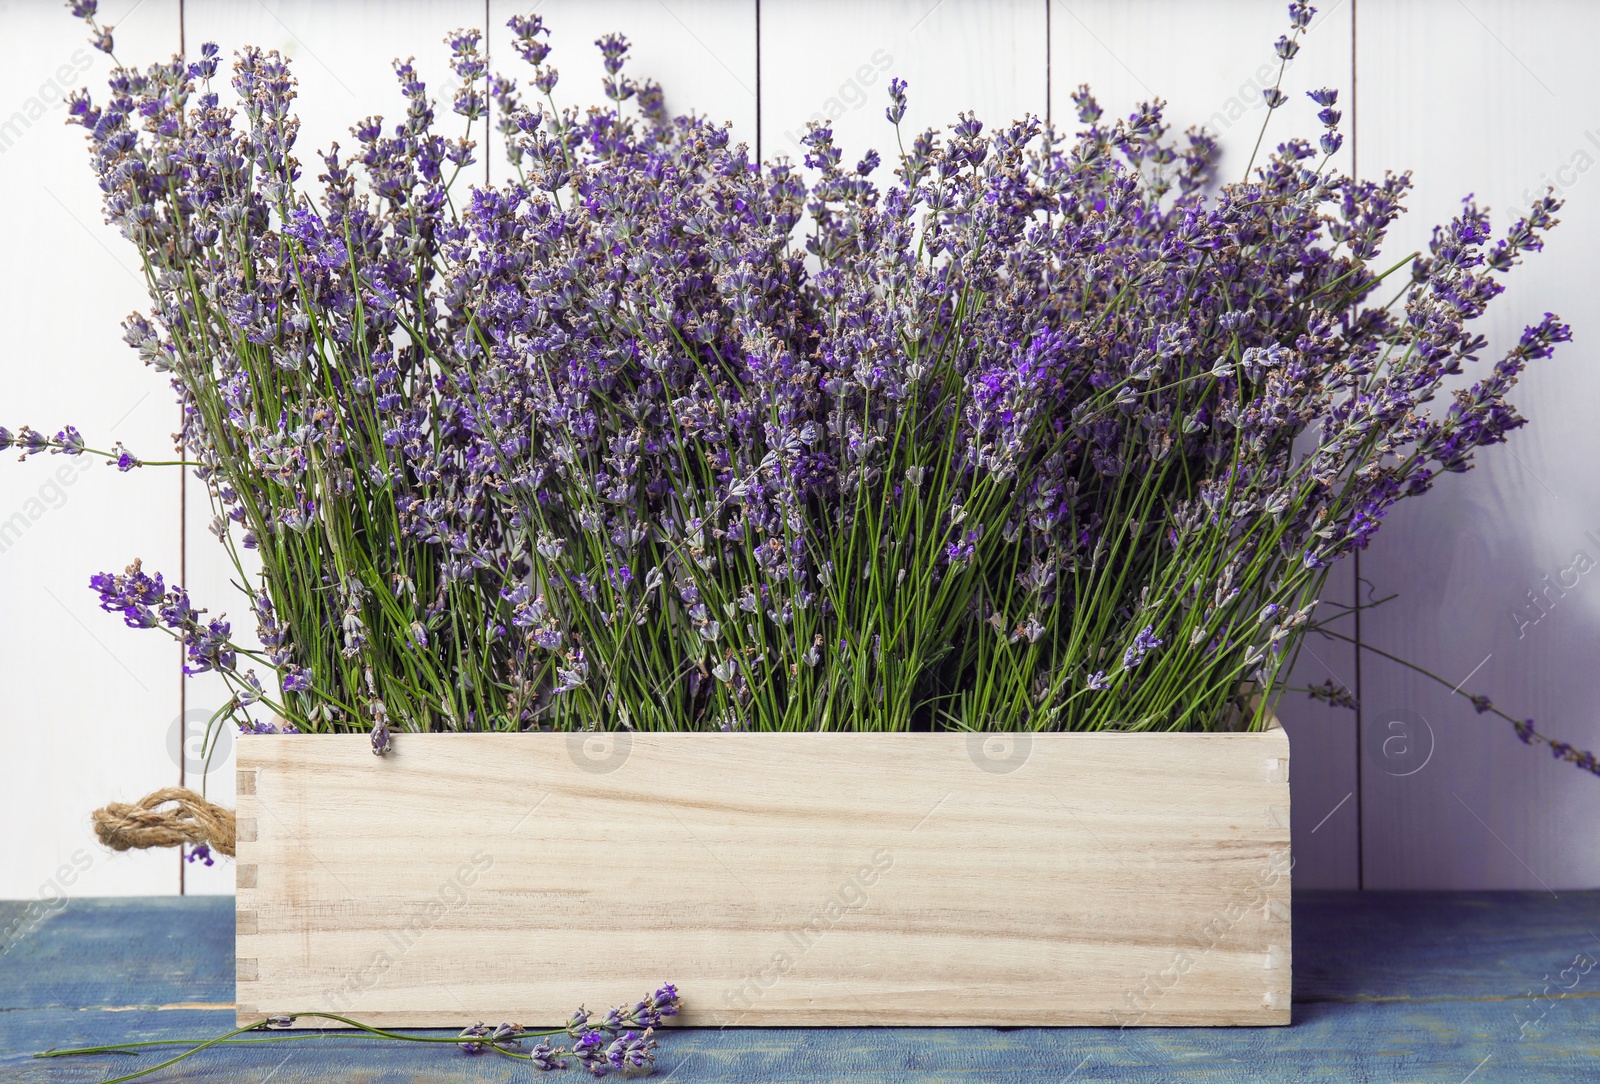 Photo of Blooming lavender flowers in wooden crate on table